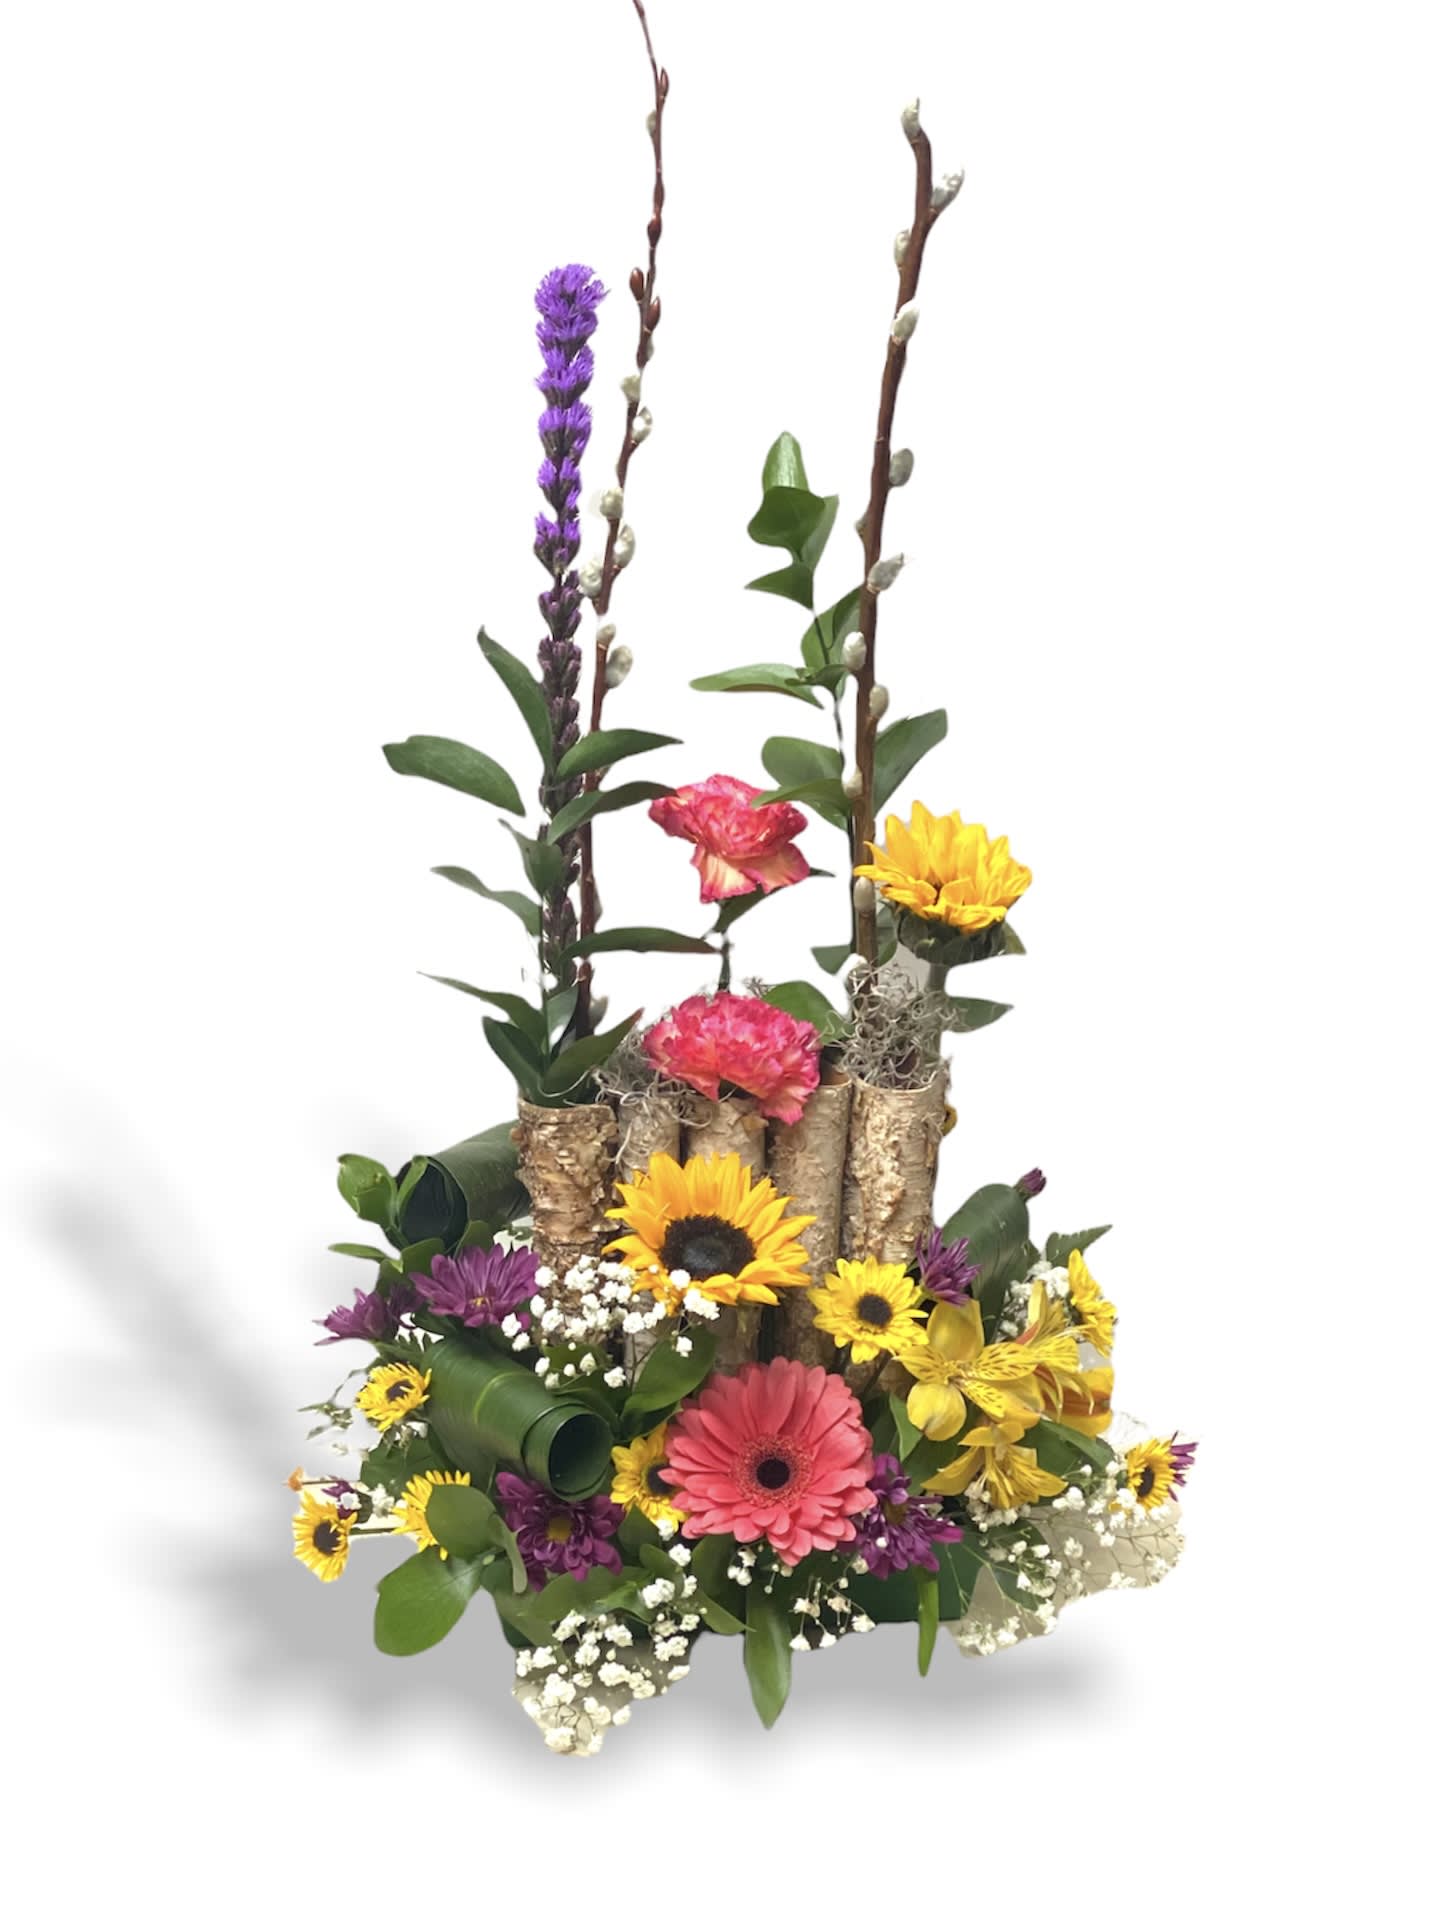 Walk in the woods bouquet - Walk in the woods bouquet Features sunflowers carnations Gerber daisies babies breath along with birch tree bark Perfect for any occasion